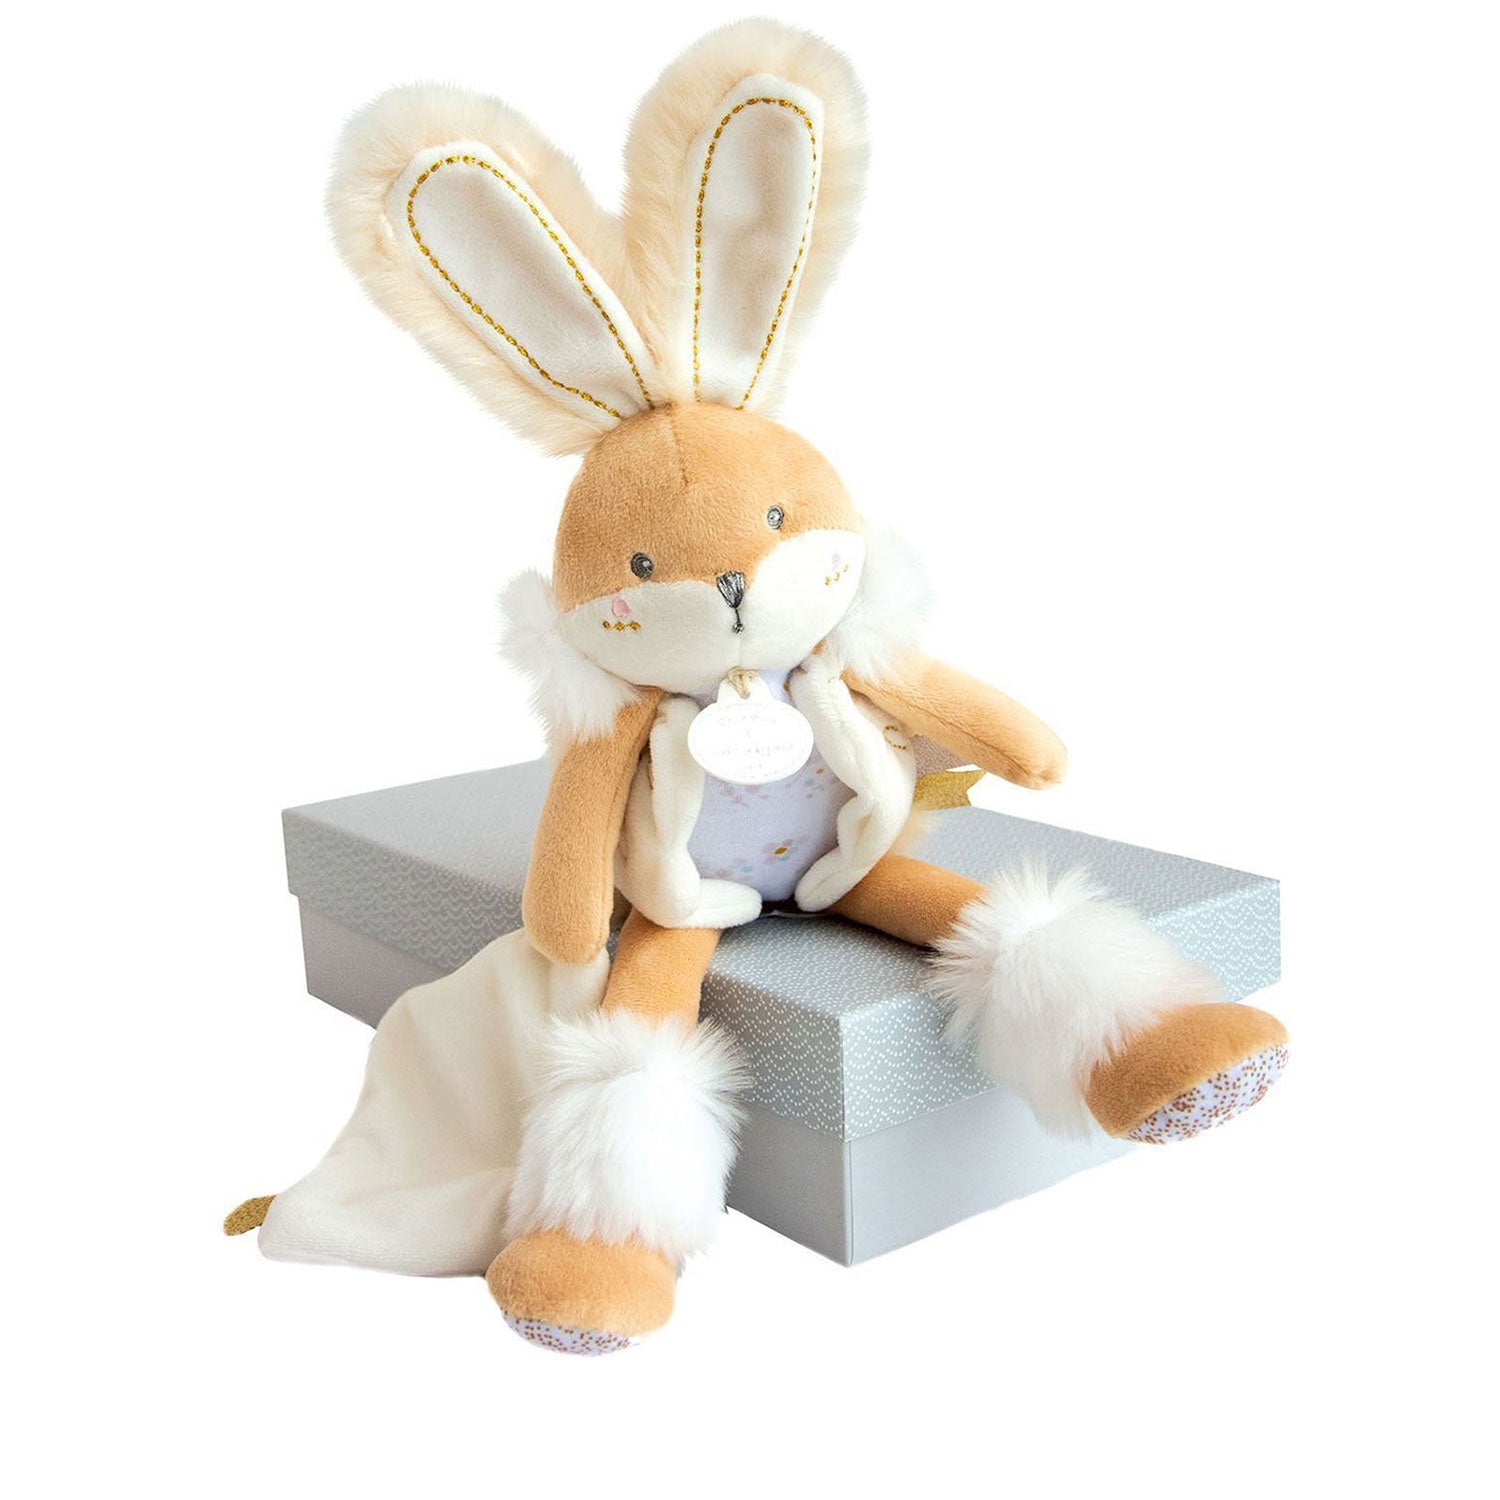 Front view of sugar bunny with blanket and box.